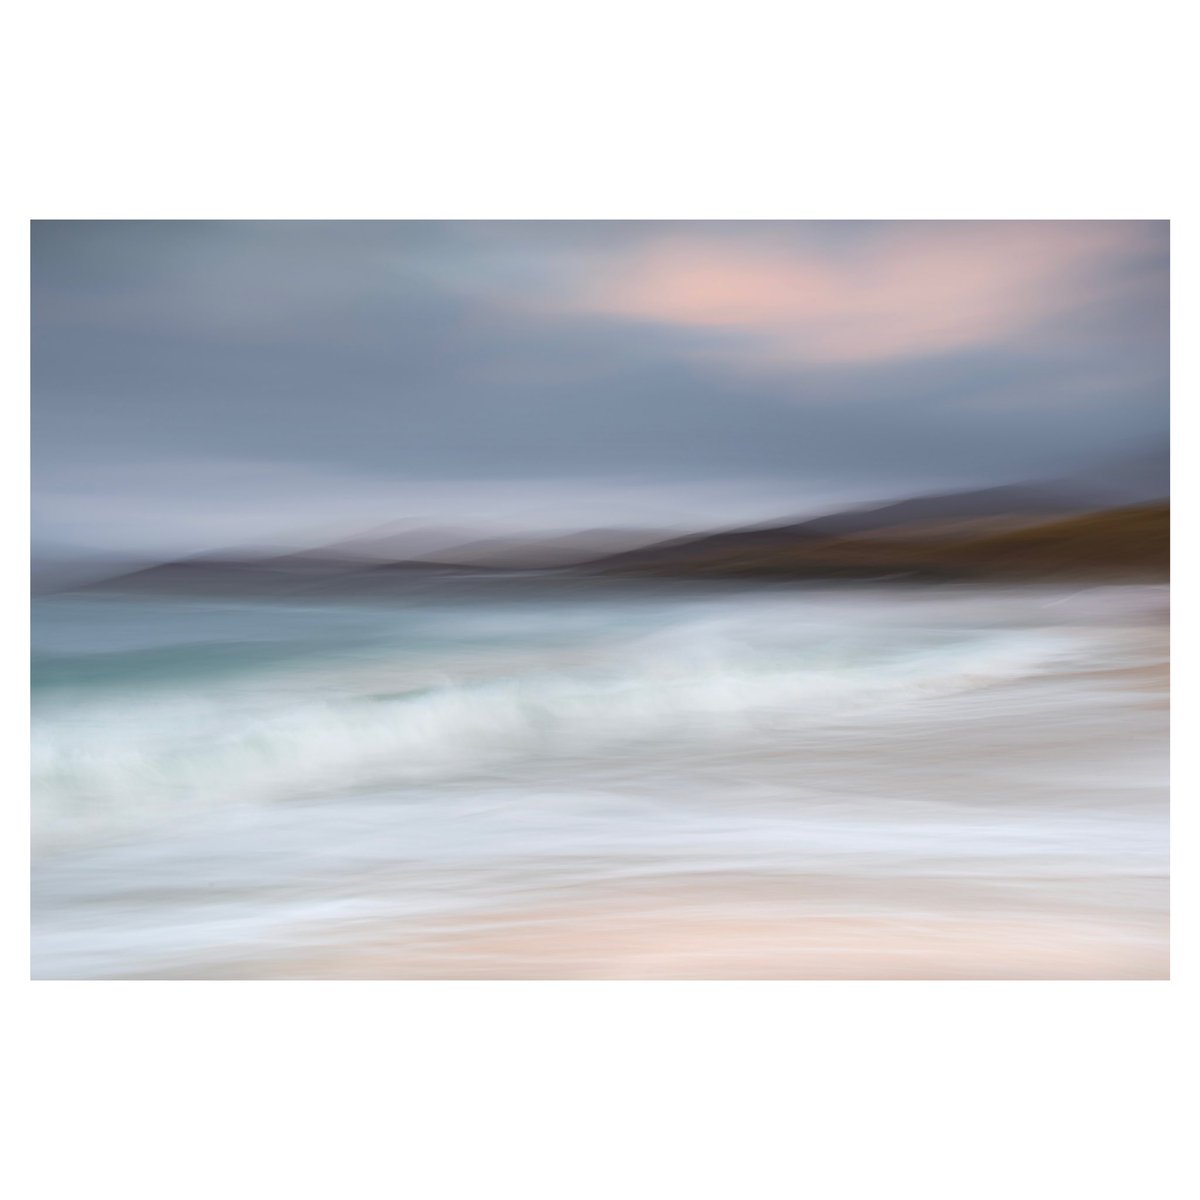 A touch of colour and lots of swooshery! 

#icm #photography #scotland